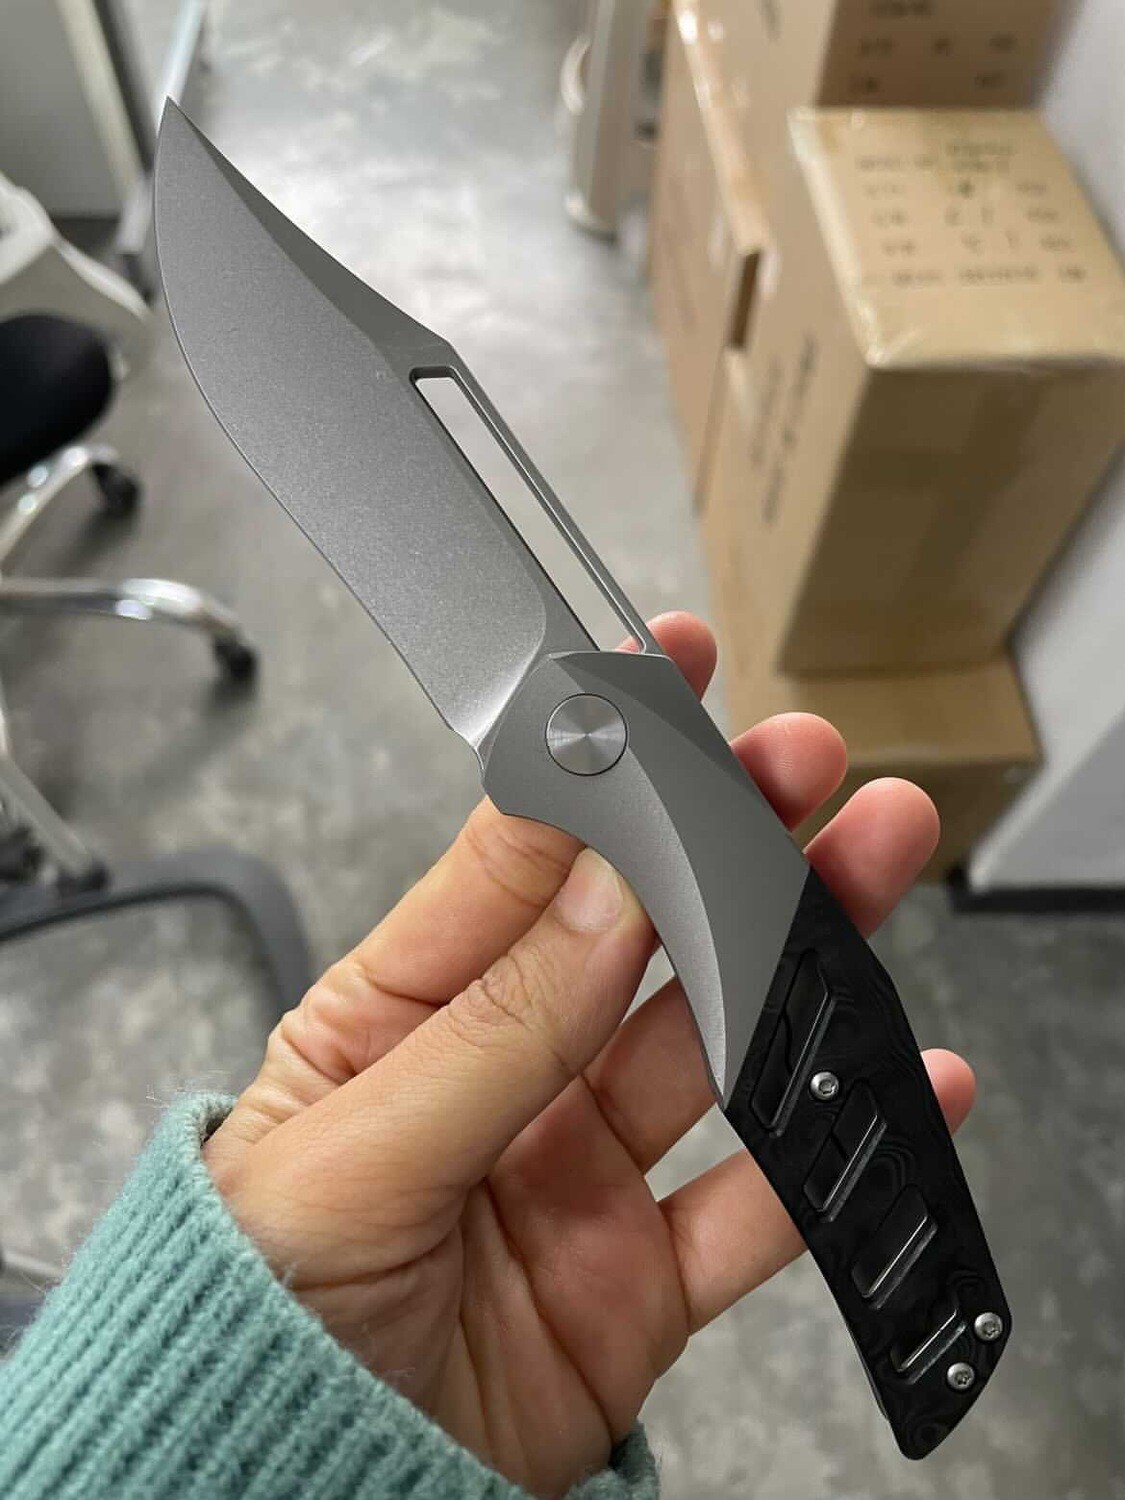 Primordial MK3 Stonewashed Blade with Carbon Fiber Scales